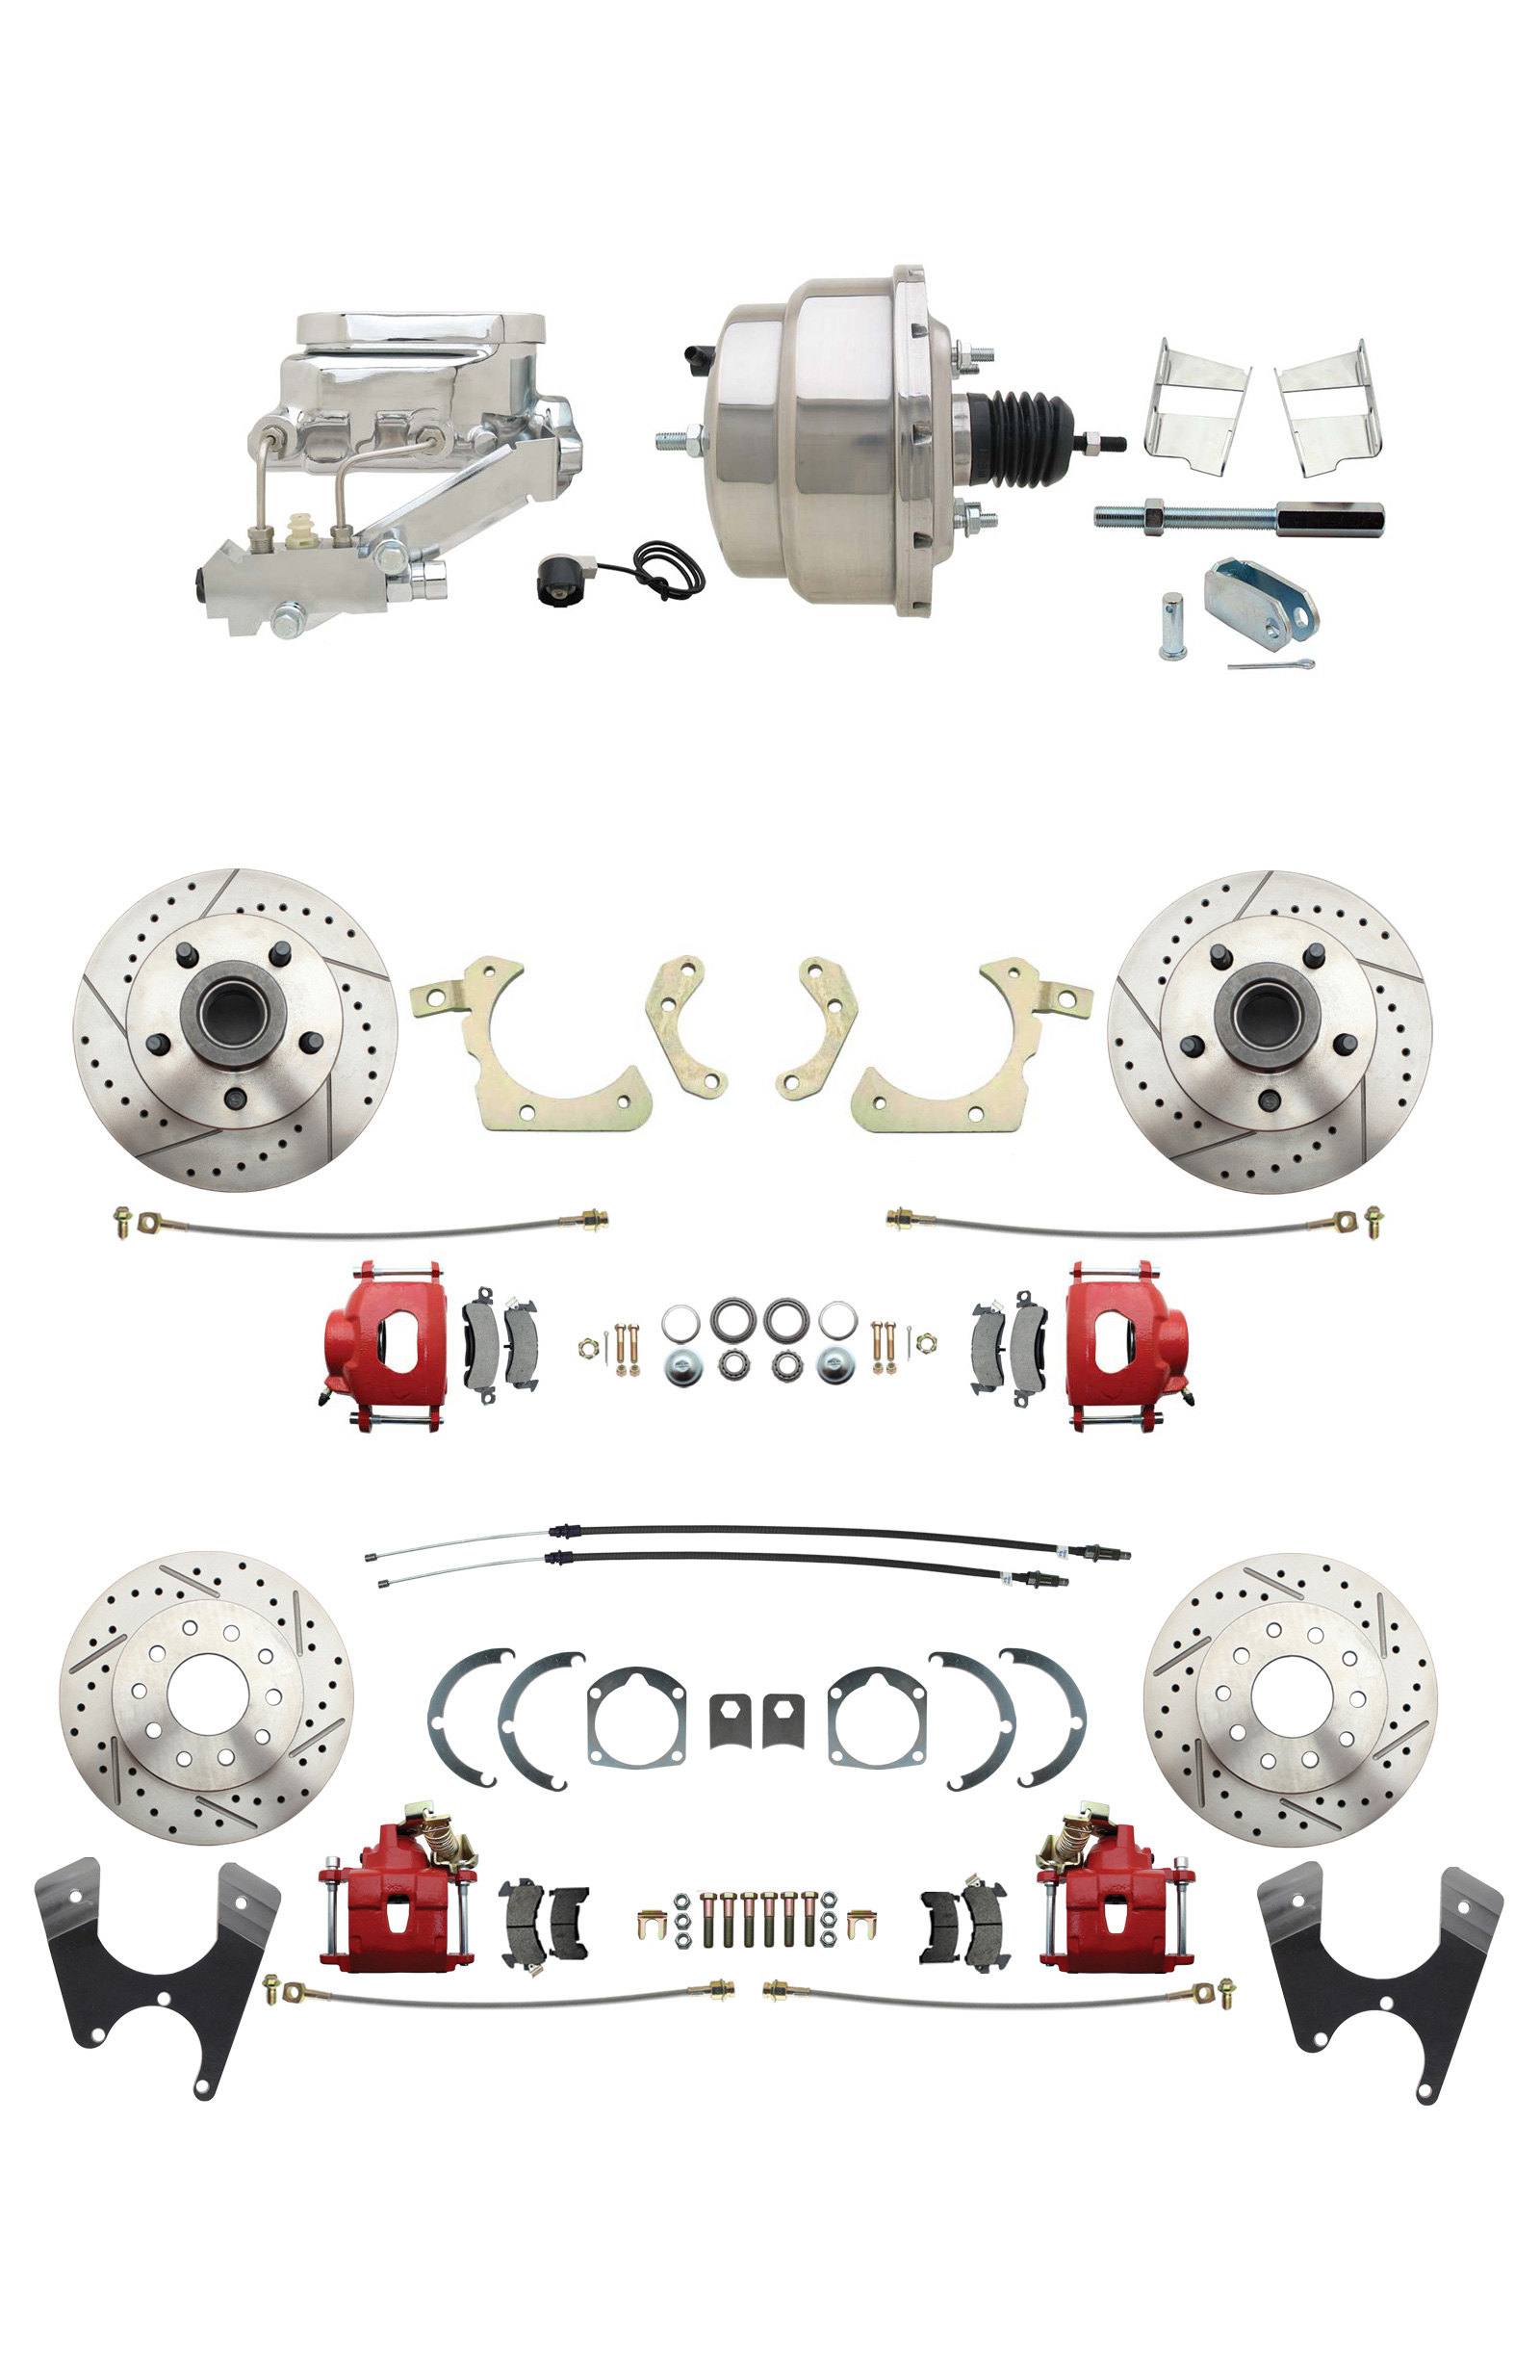 1959-1964 GM Full Size Front & Rear Power Disc Brake Kit Red Powder Coated Calipers Drilled/Slotted Rotors (Impala, Bel Air, Biscayne) & 8 Dual Stainless Steel Booster Conversion Kit W/ Chrome Flat Top Master Cylinder L